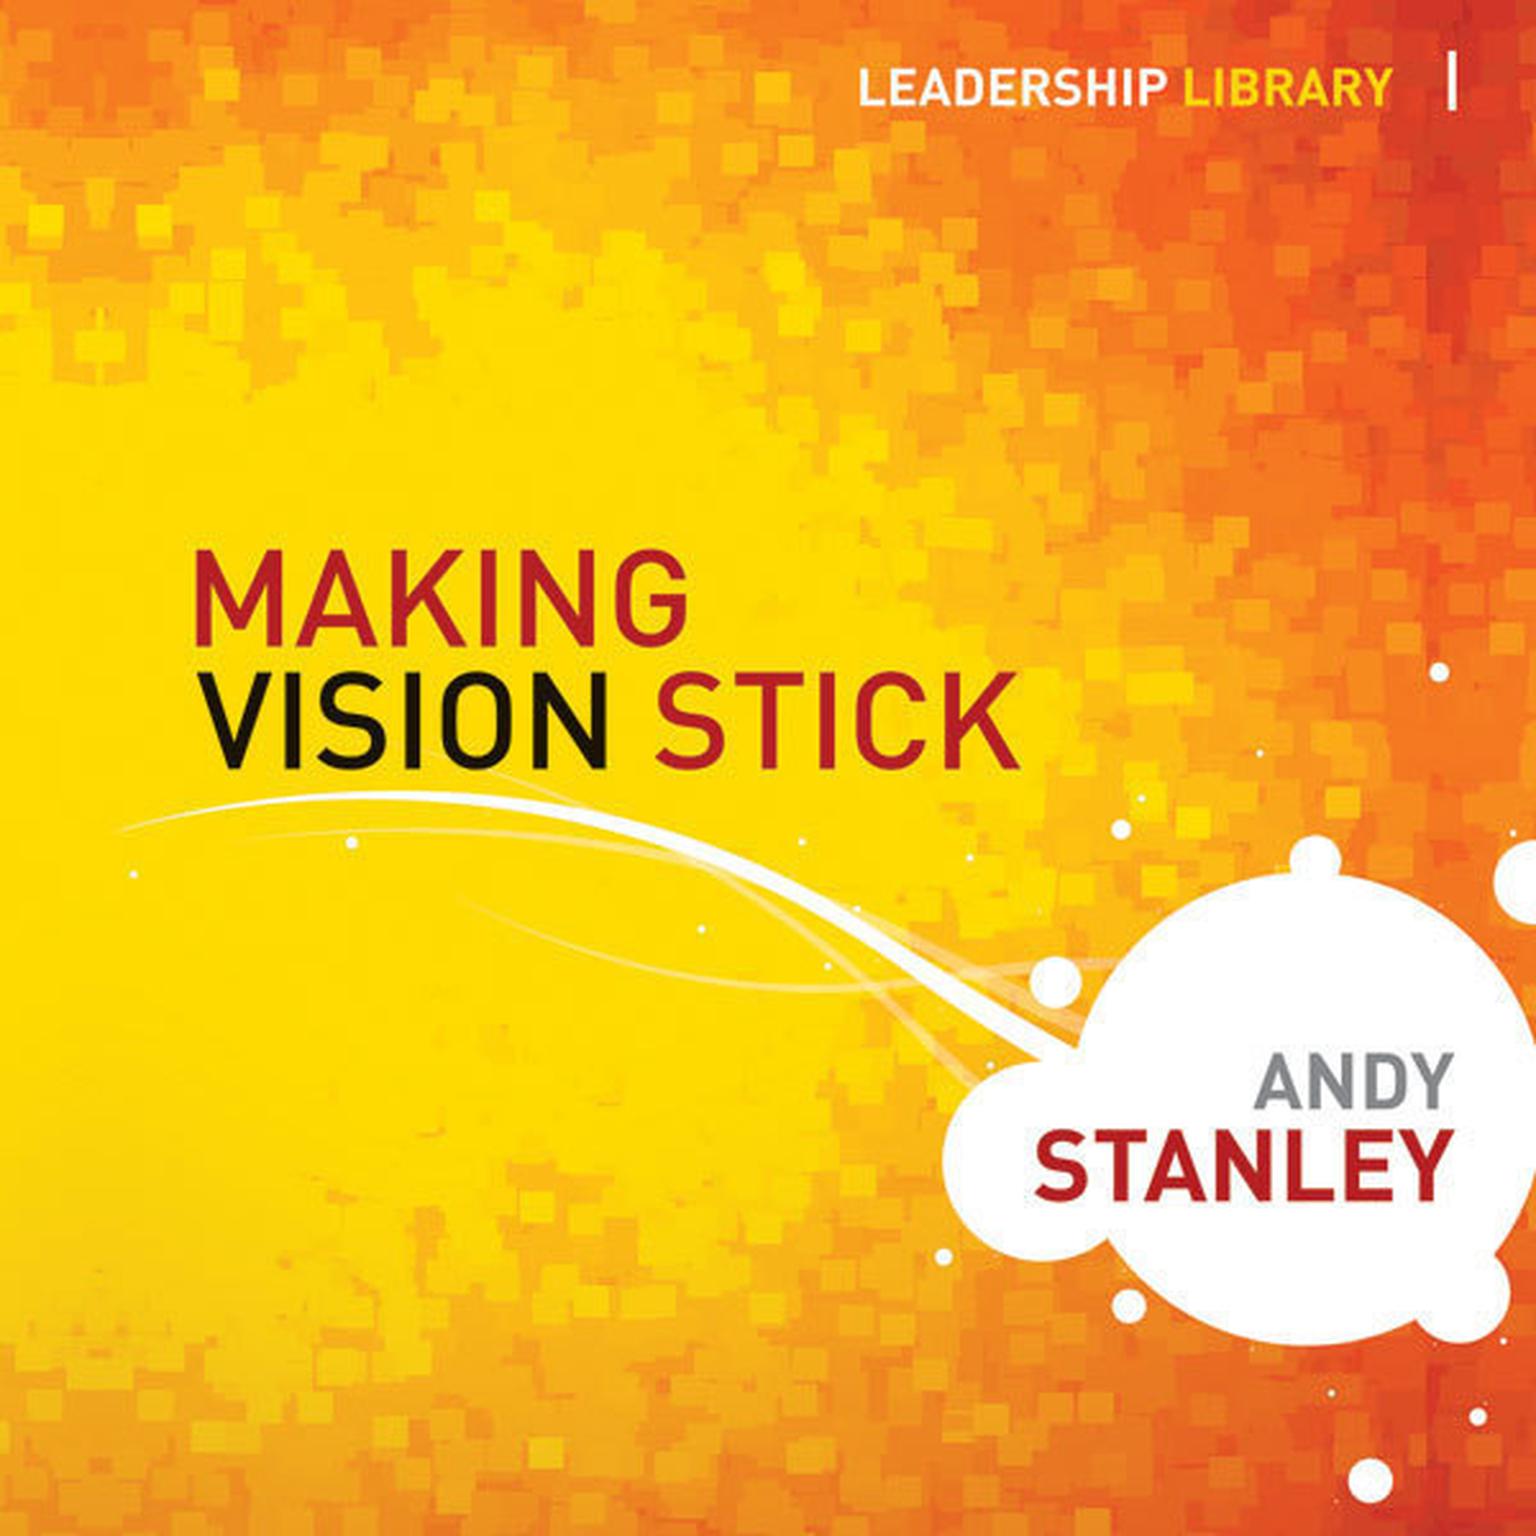 Making Vision Stick Audiobook, by Andy Stanley